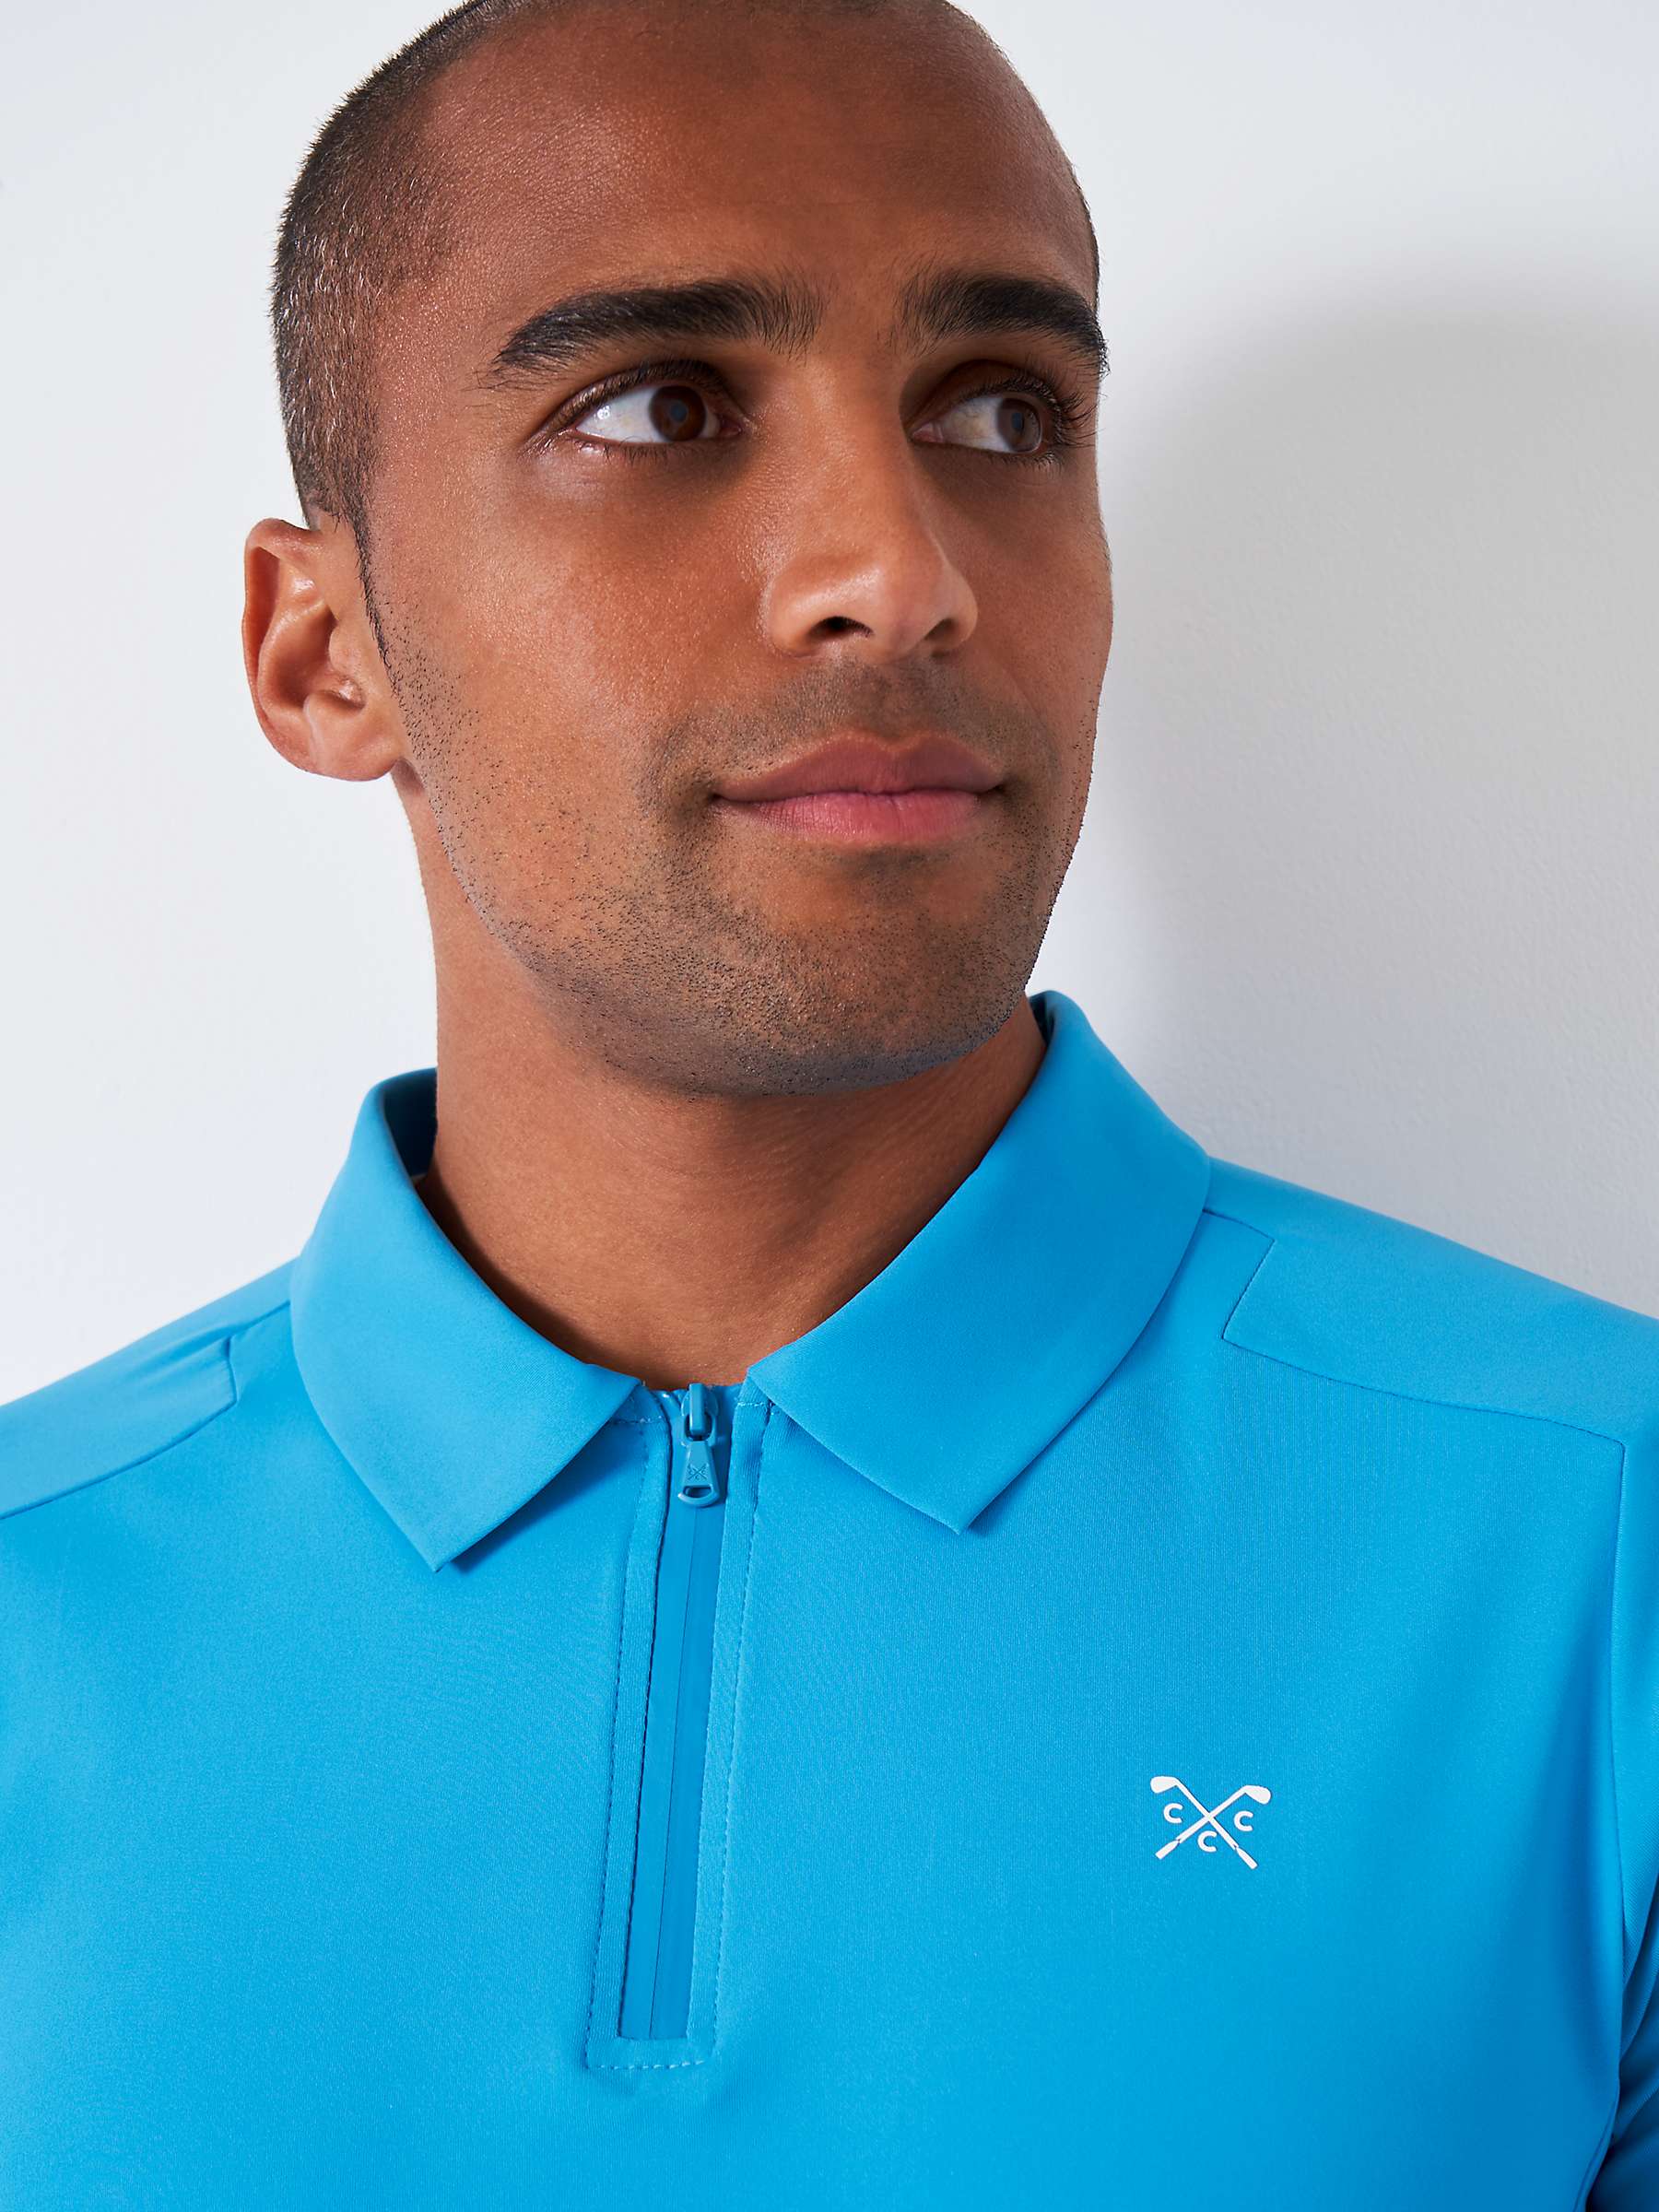 Buy Crew Clothing Champion Golf Polo Shirt, Blue Online at johnlewis.com